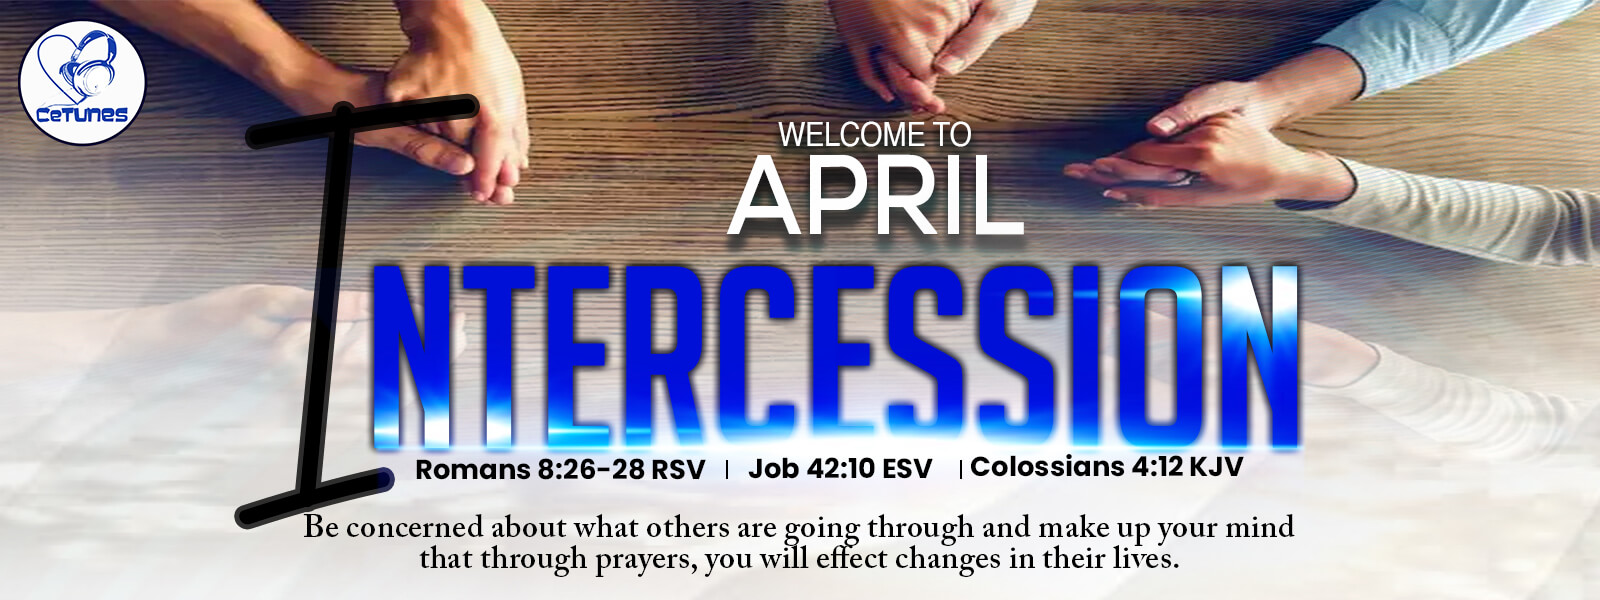 APRIL IS OUR MONTH OF INTERCESSION